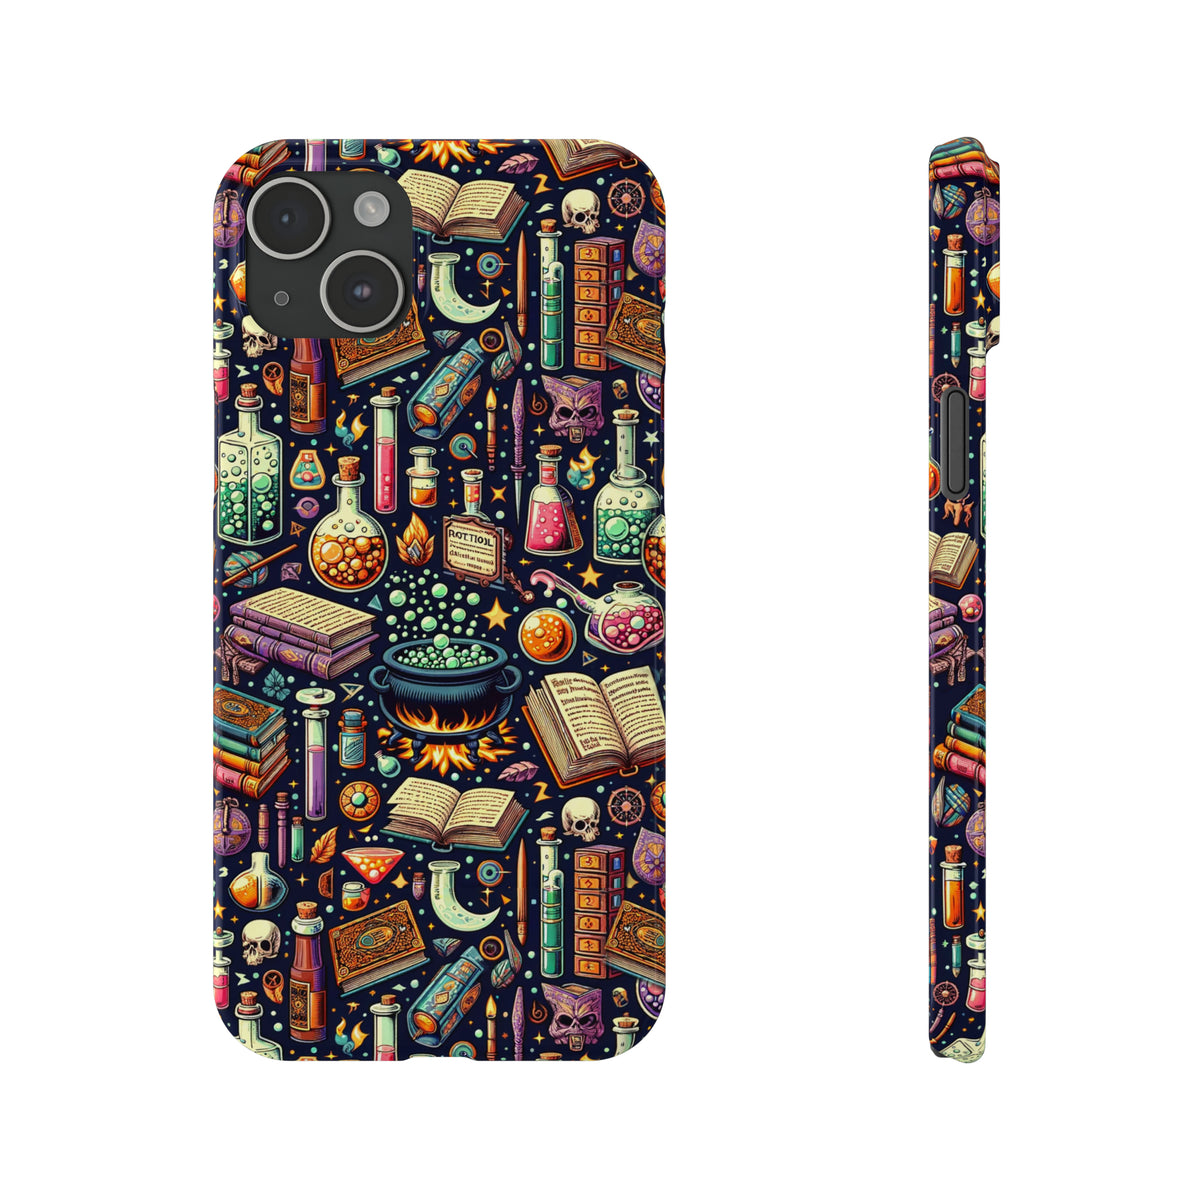 Magic Couldron and Potions in World of Wizards Phone Case